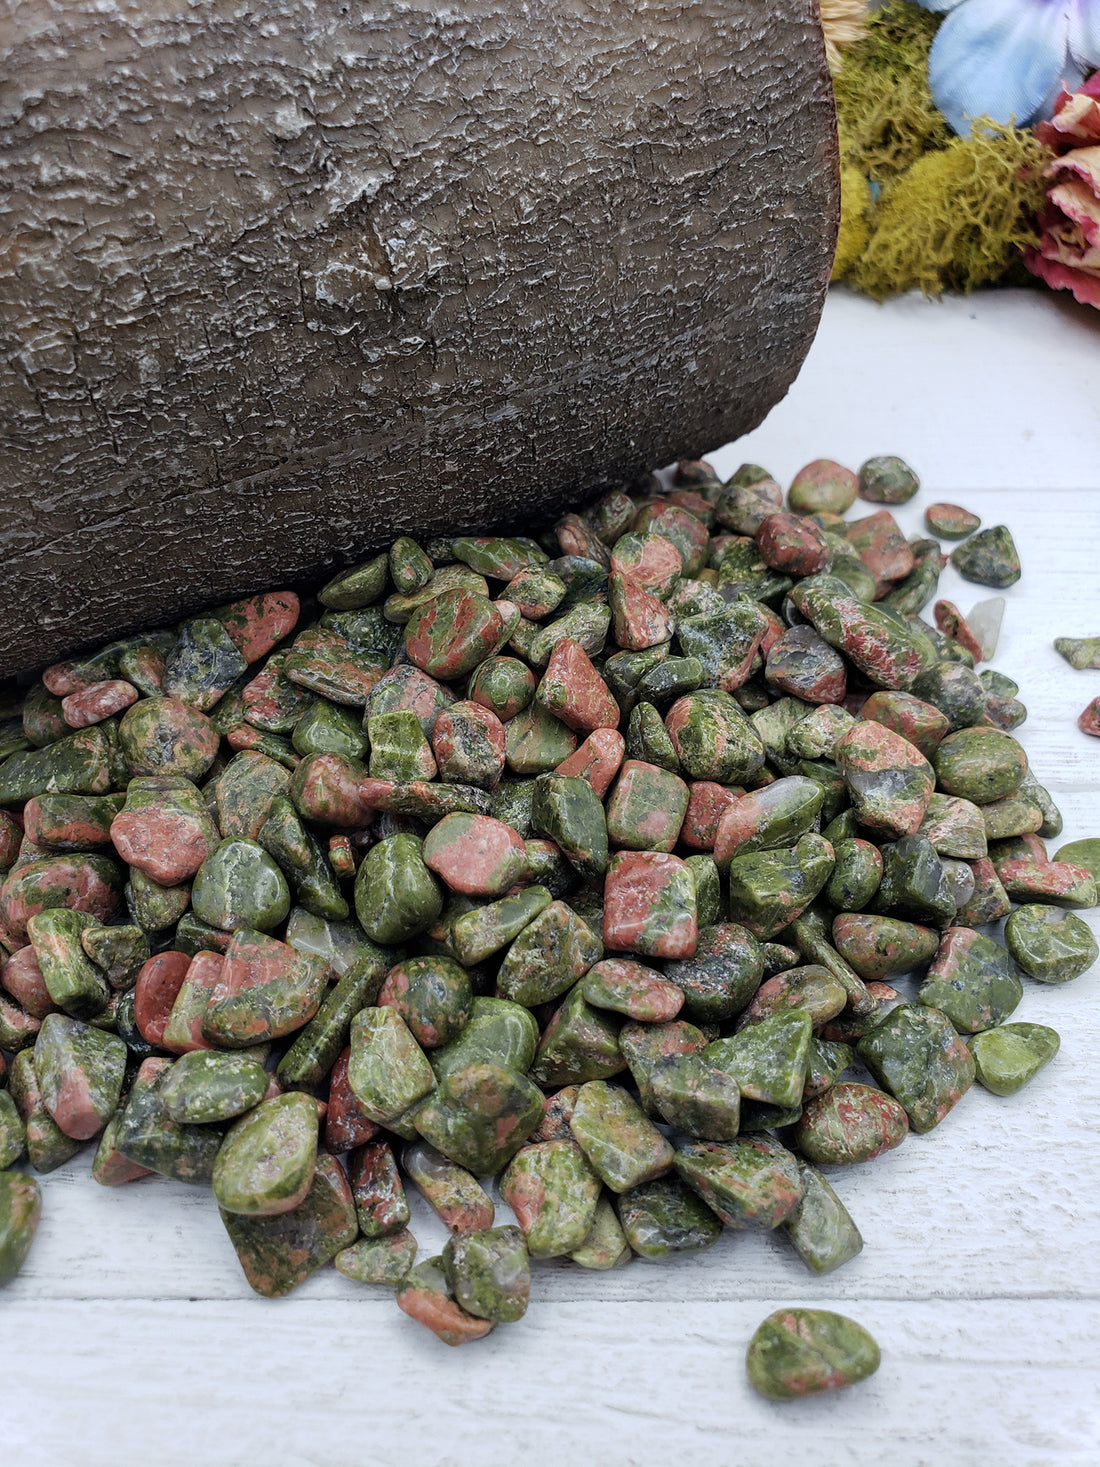 six ounces of unakite chips on display